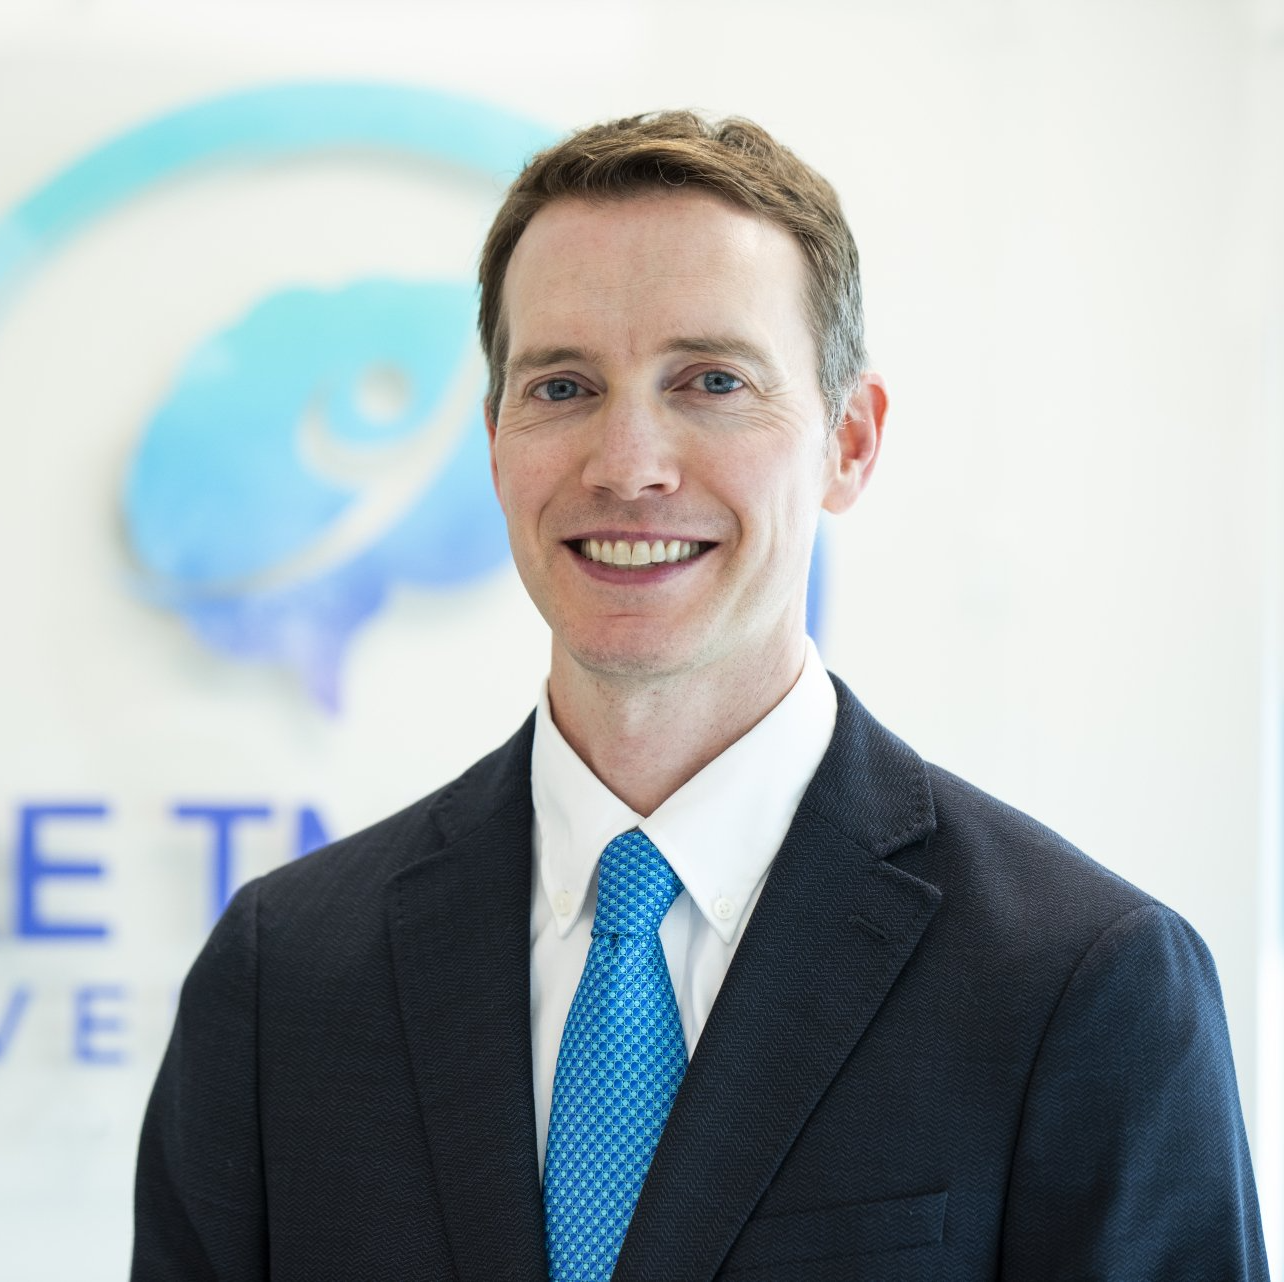 A man in a suit and tie is smiling in front of a sign that says et